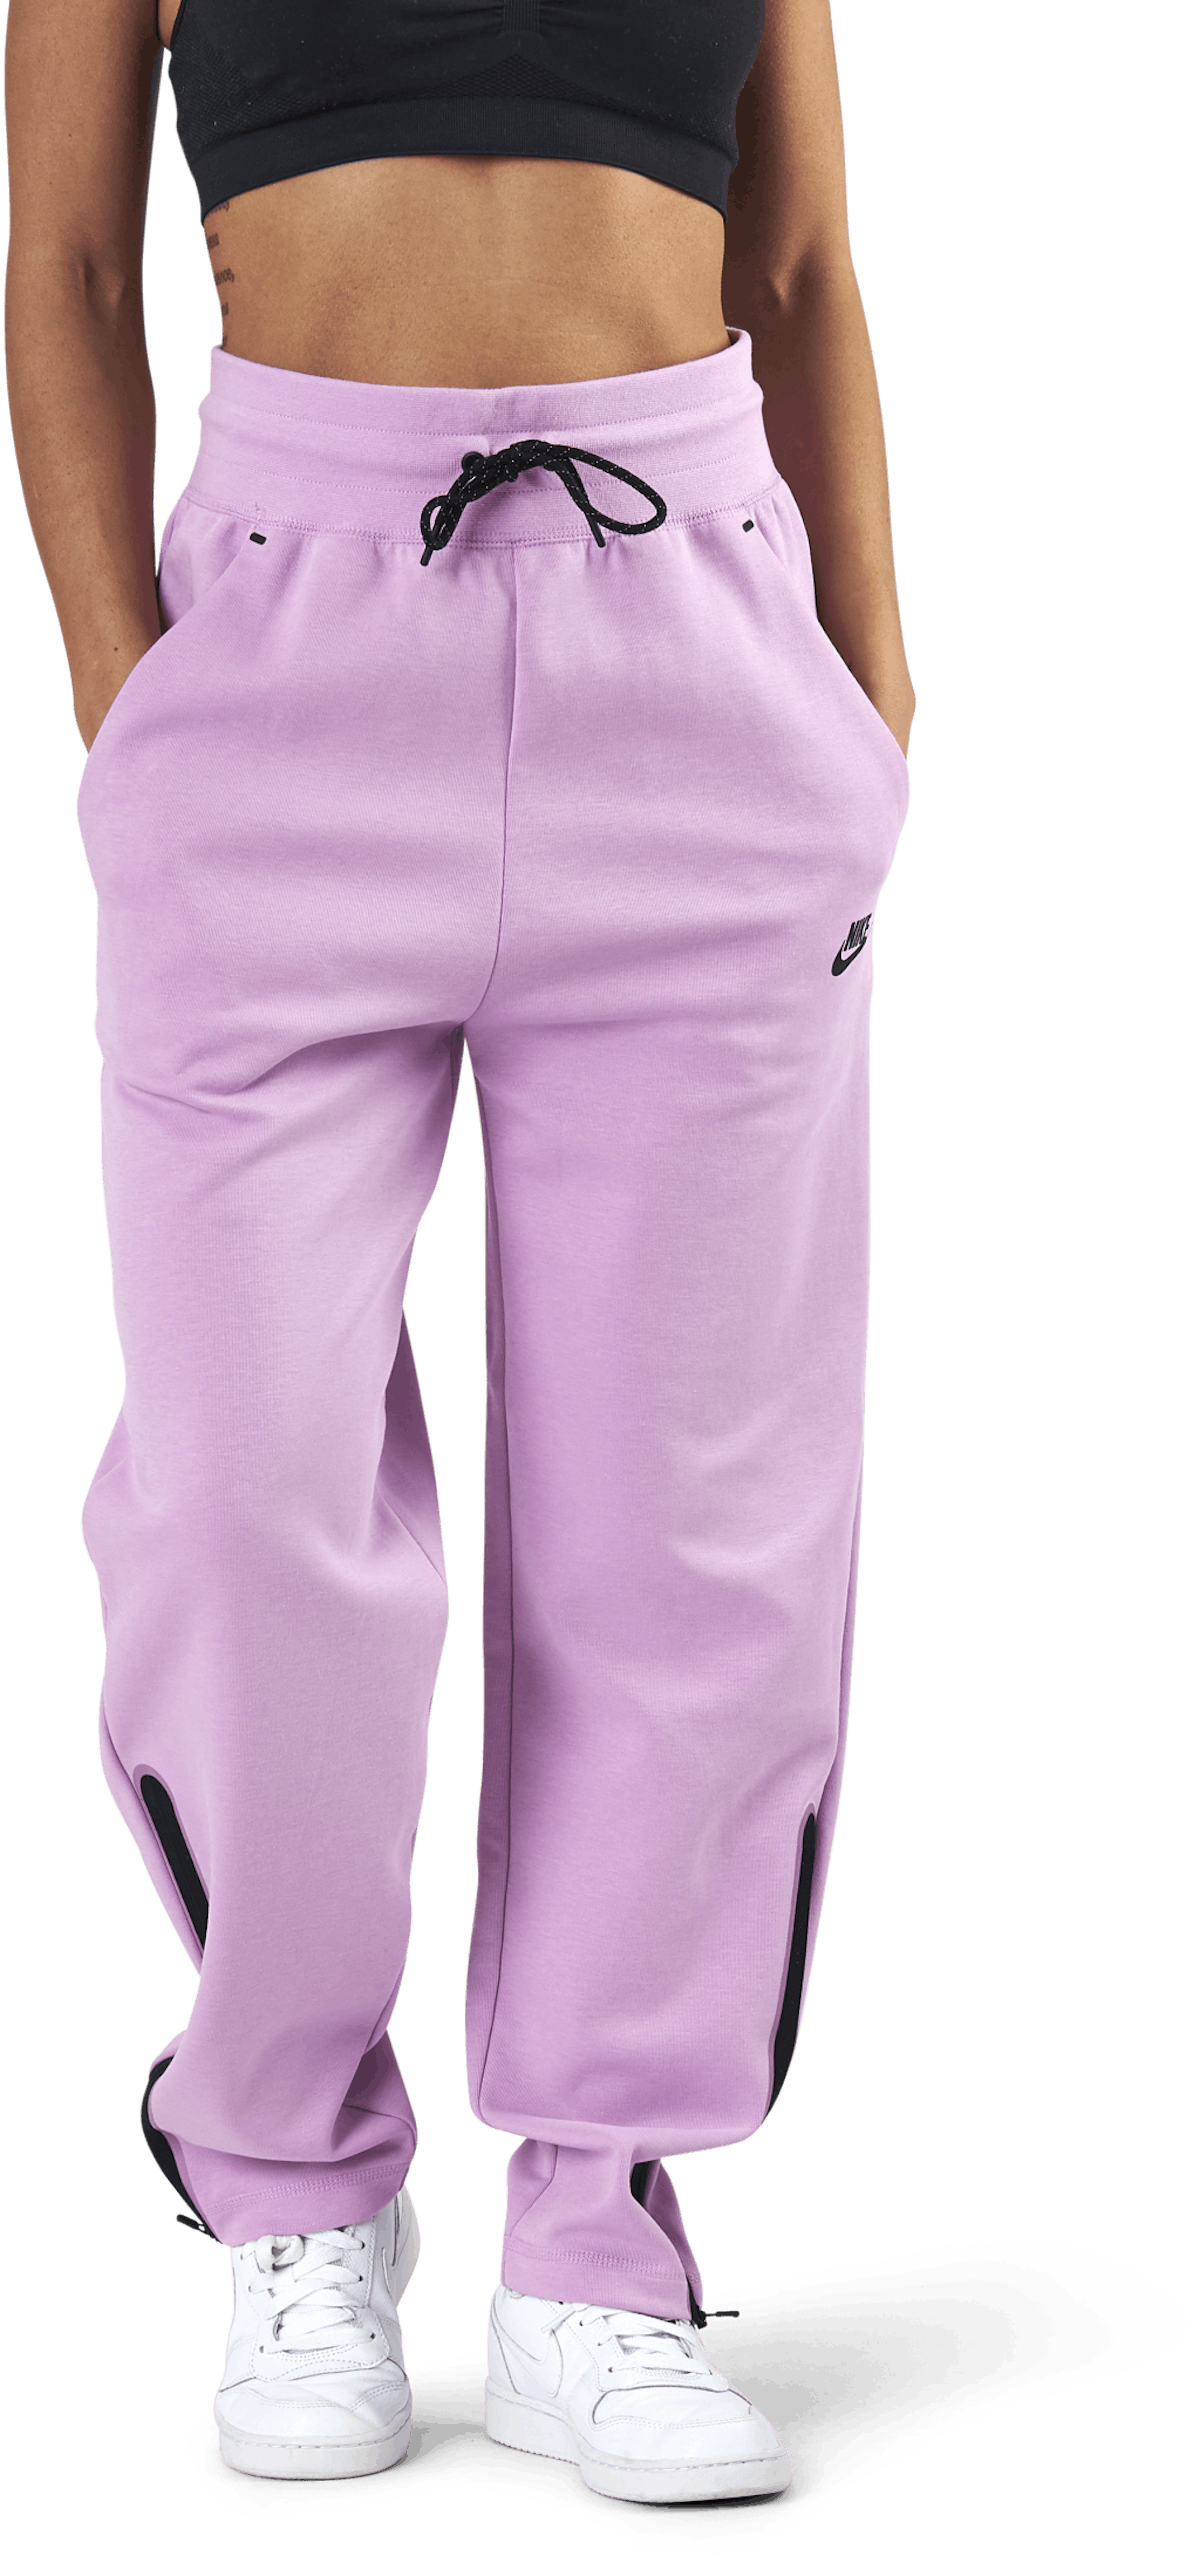 Nsw Tch Flc Oh Pant Pink | The best sport brands | Sportamore